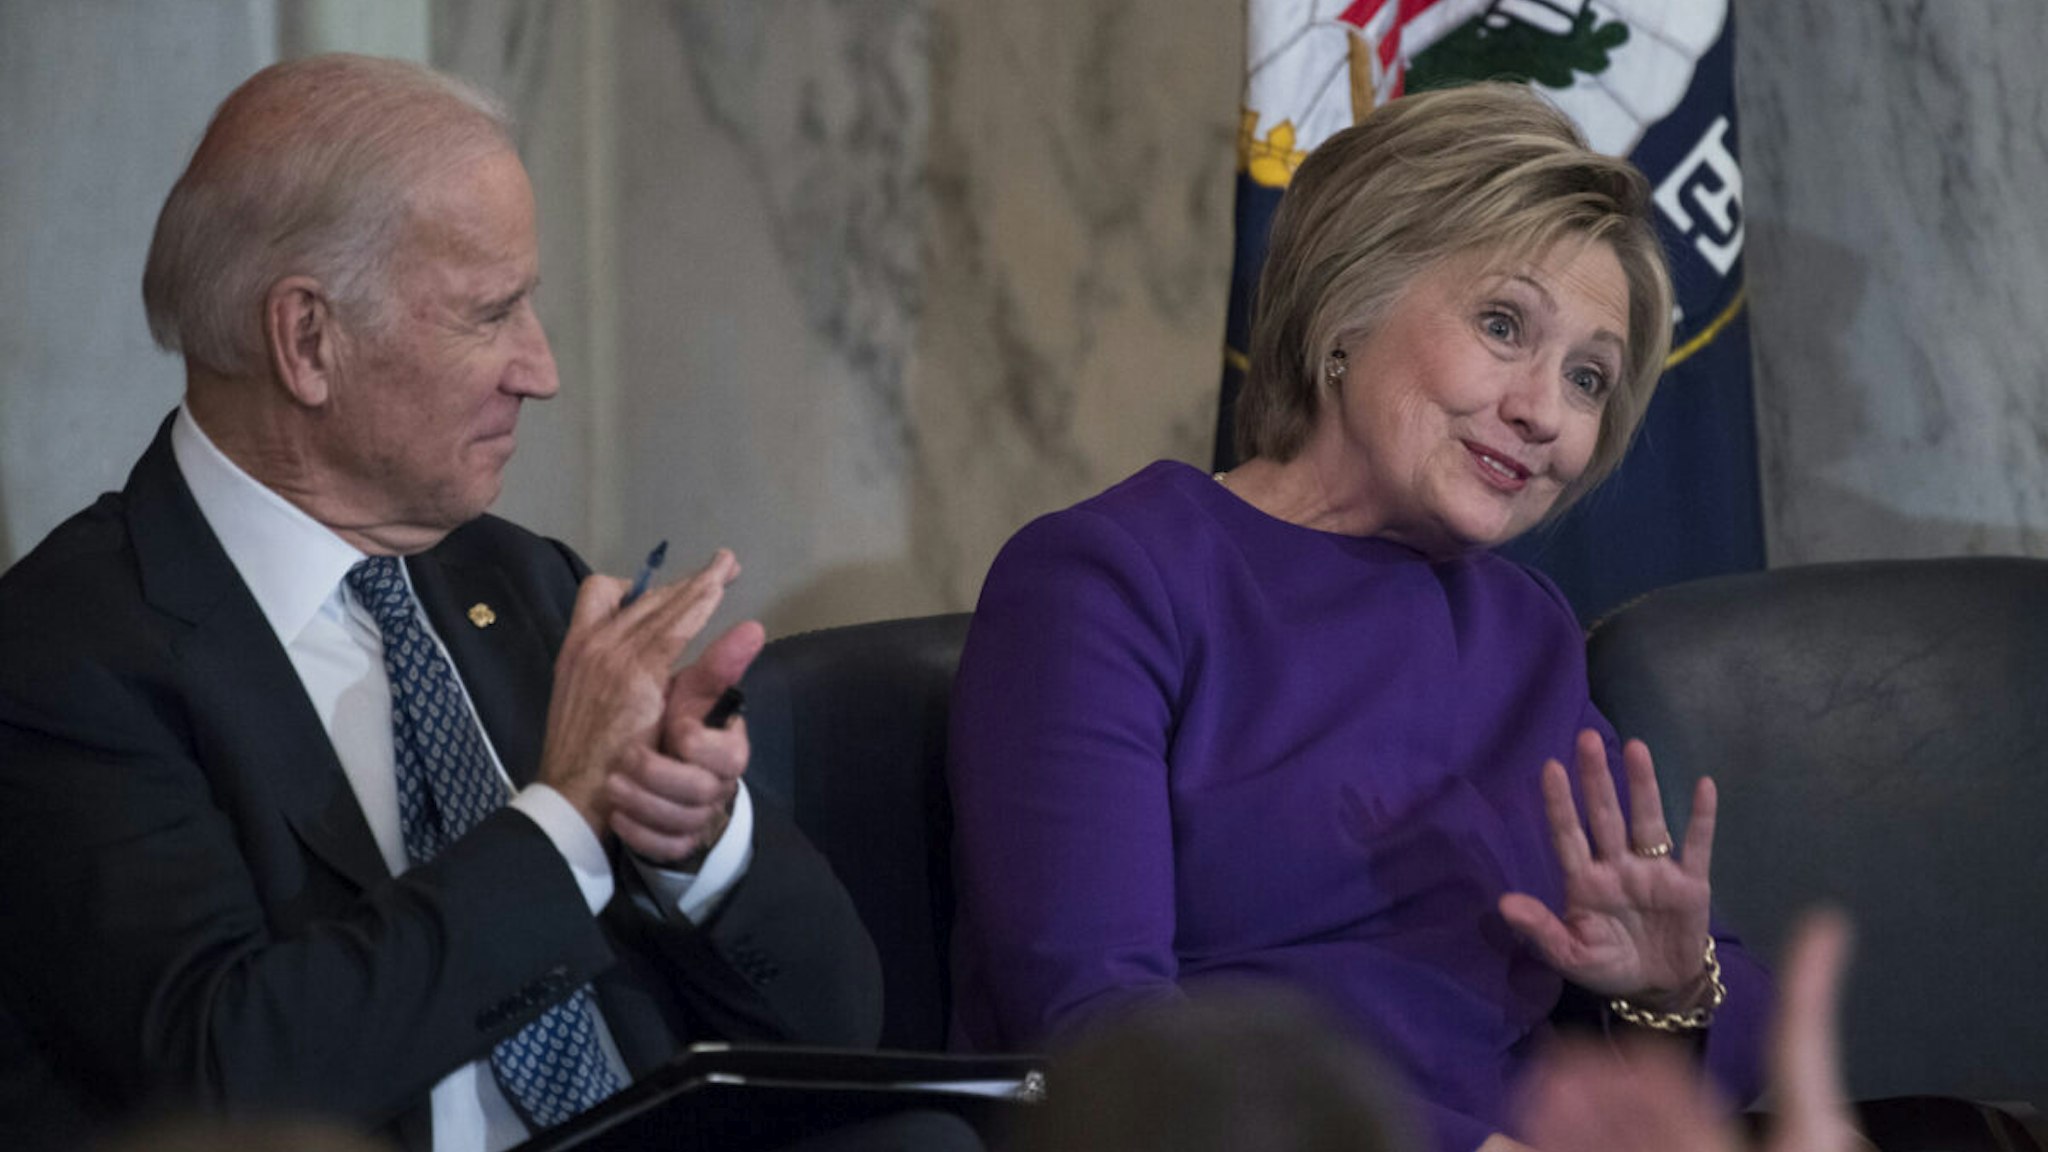 Vice President Joe Biden and former Secretary of State Hillary Clinton attend a portrait unveiling ceremony for retiring Senate Minority Leader Harry Reid, D-Nev., in Russell Building's Kennedy Caucus Room, December 08, 2016.